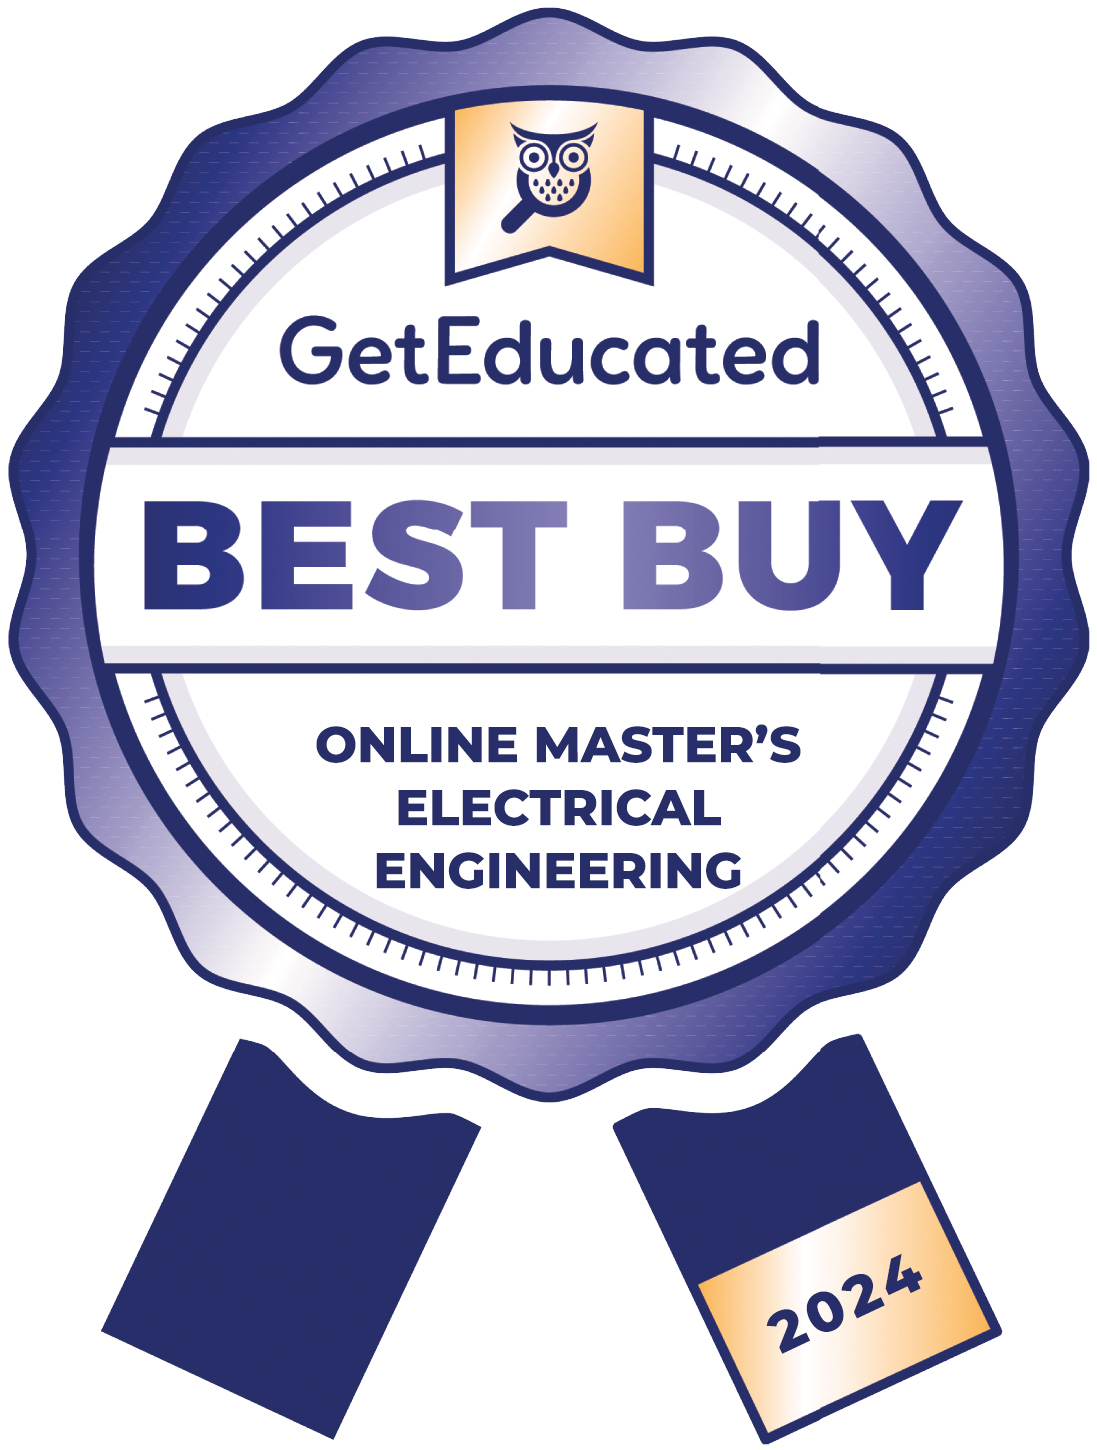 Rankings of the cheapest online master's electrical engineering programs